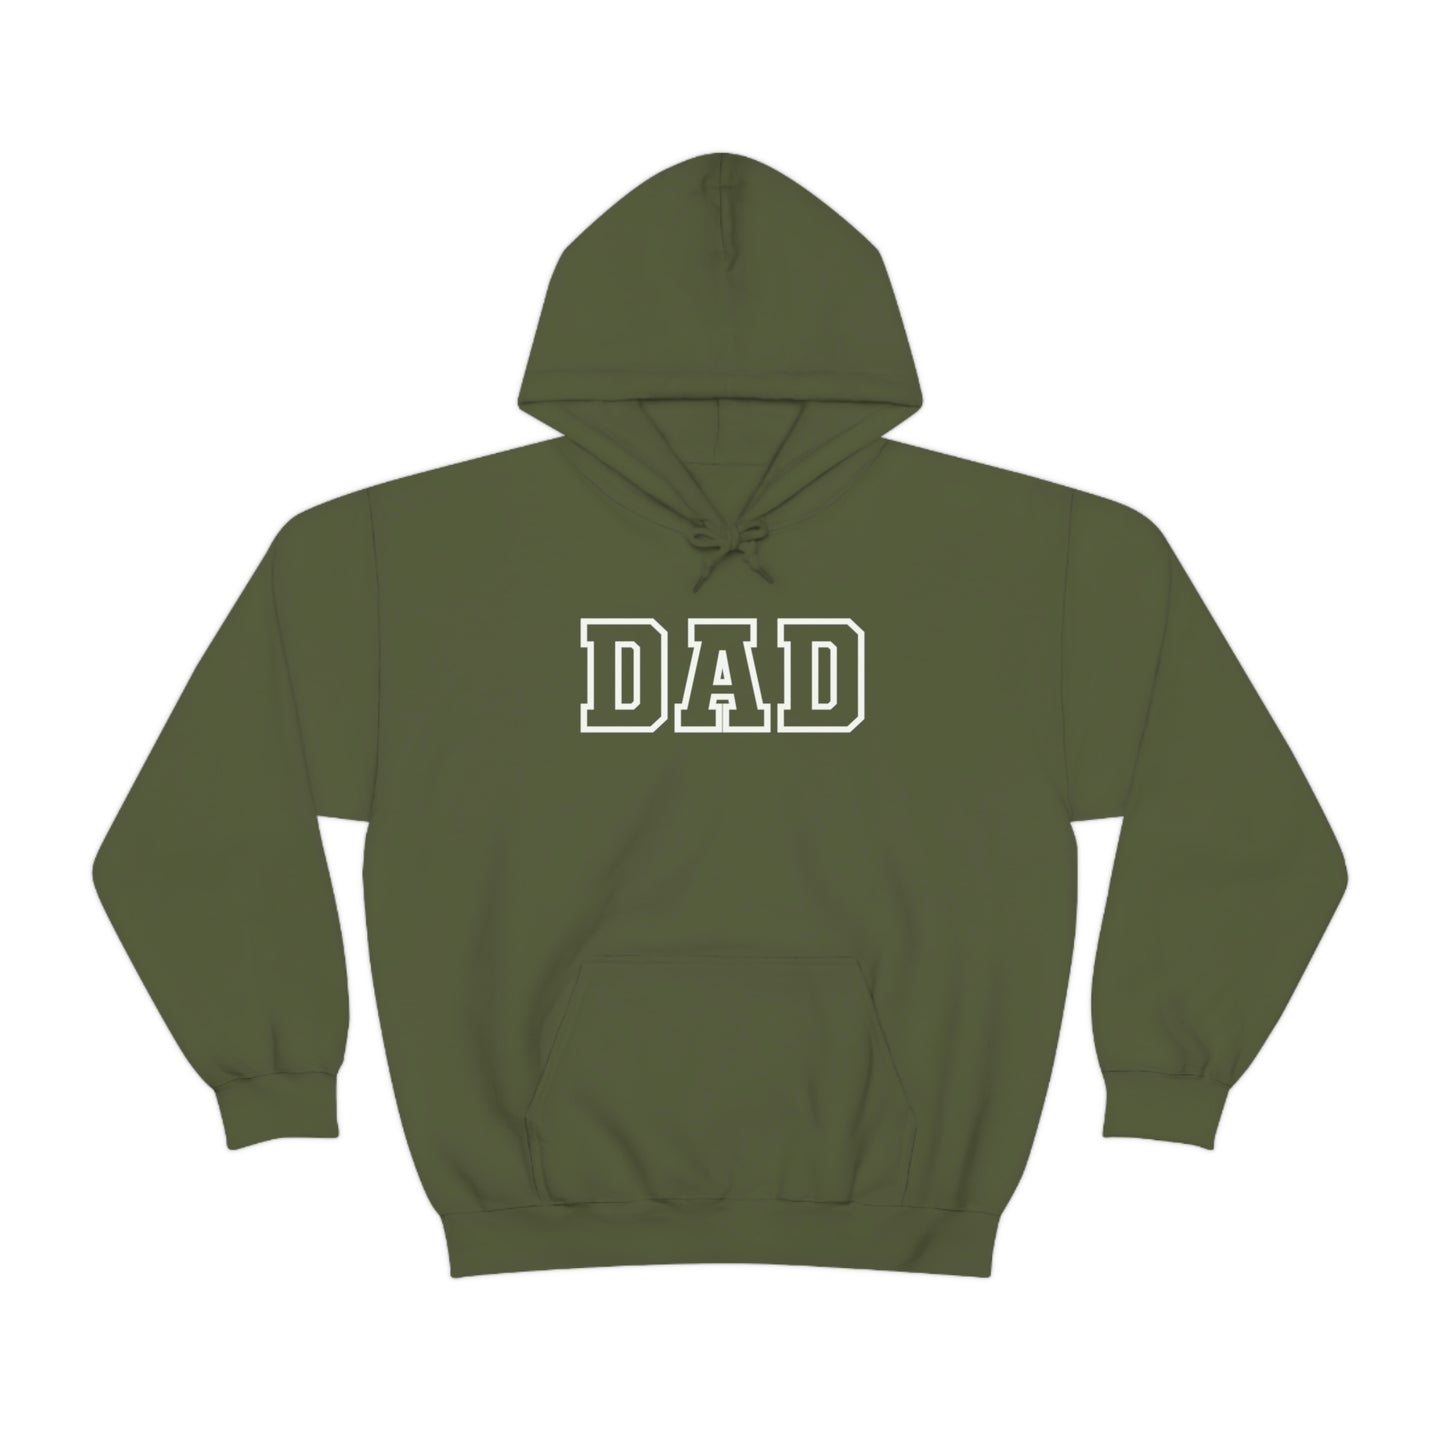 DaDa Daddy Dad Bruh Hoodie, Front and Back Print, Dad Hoodie, Dad Gift, Father's Day, Best Dad, Heavy Blend Hooded Sweatshirt